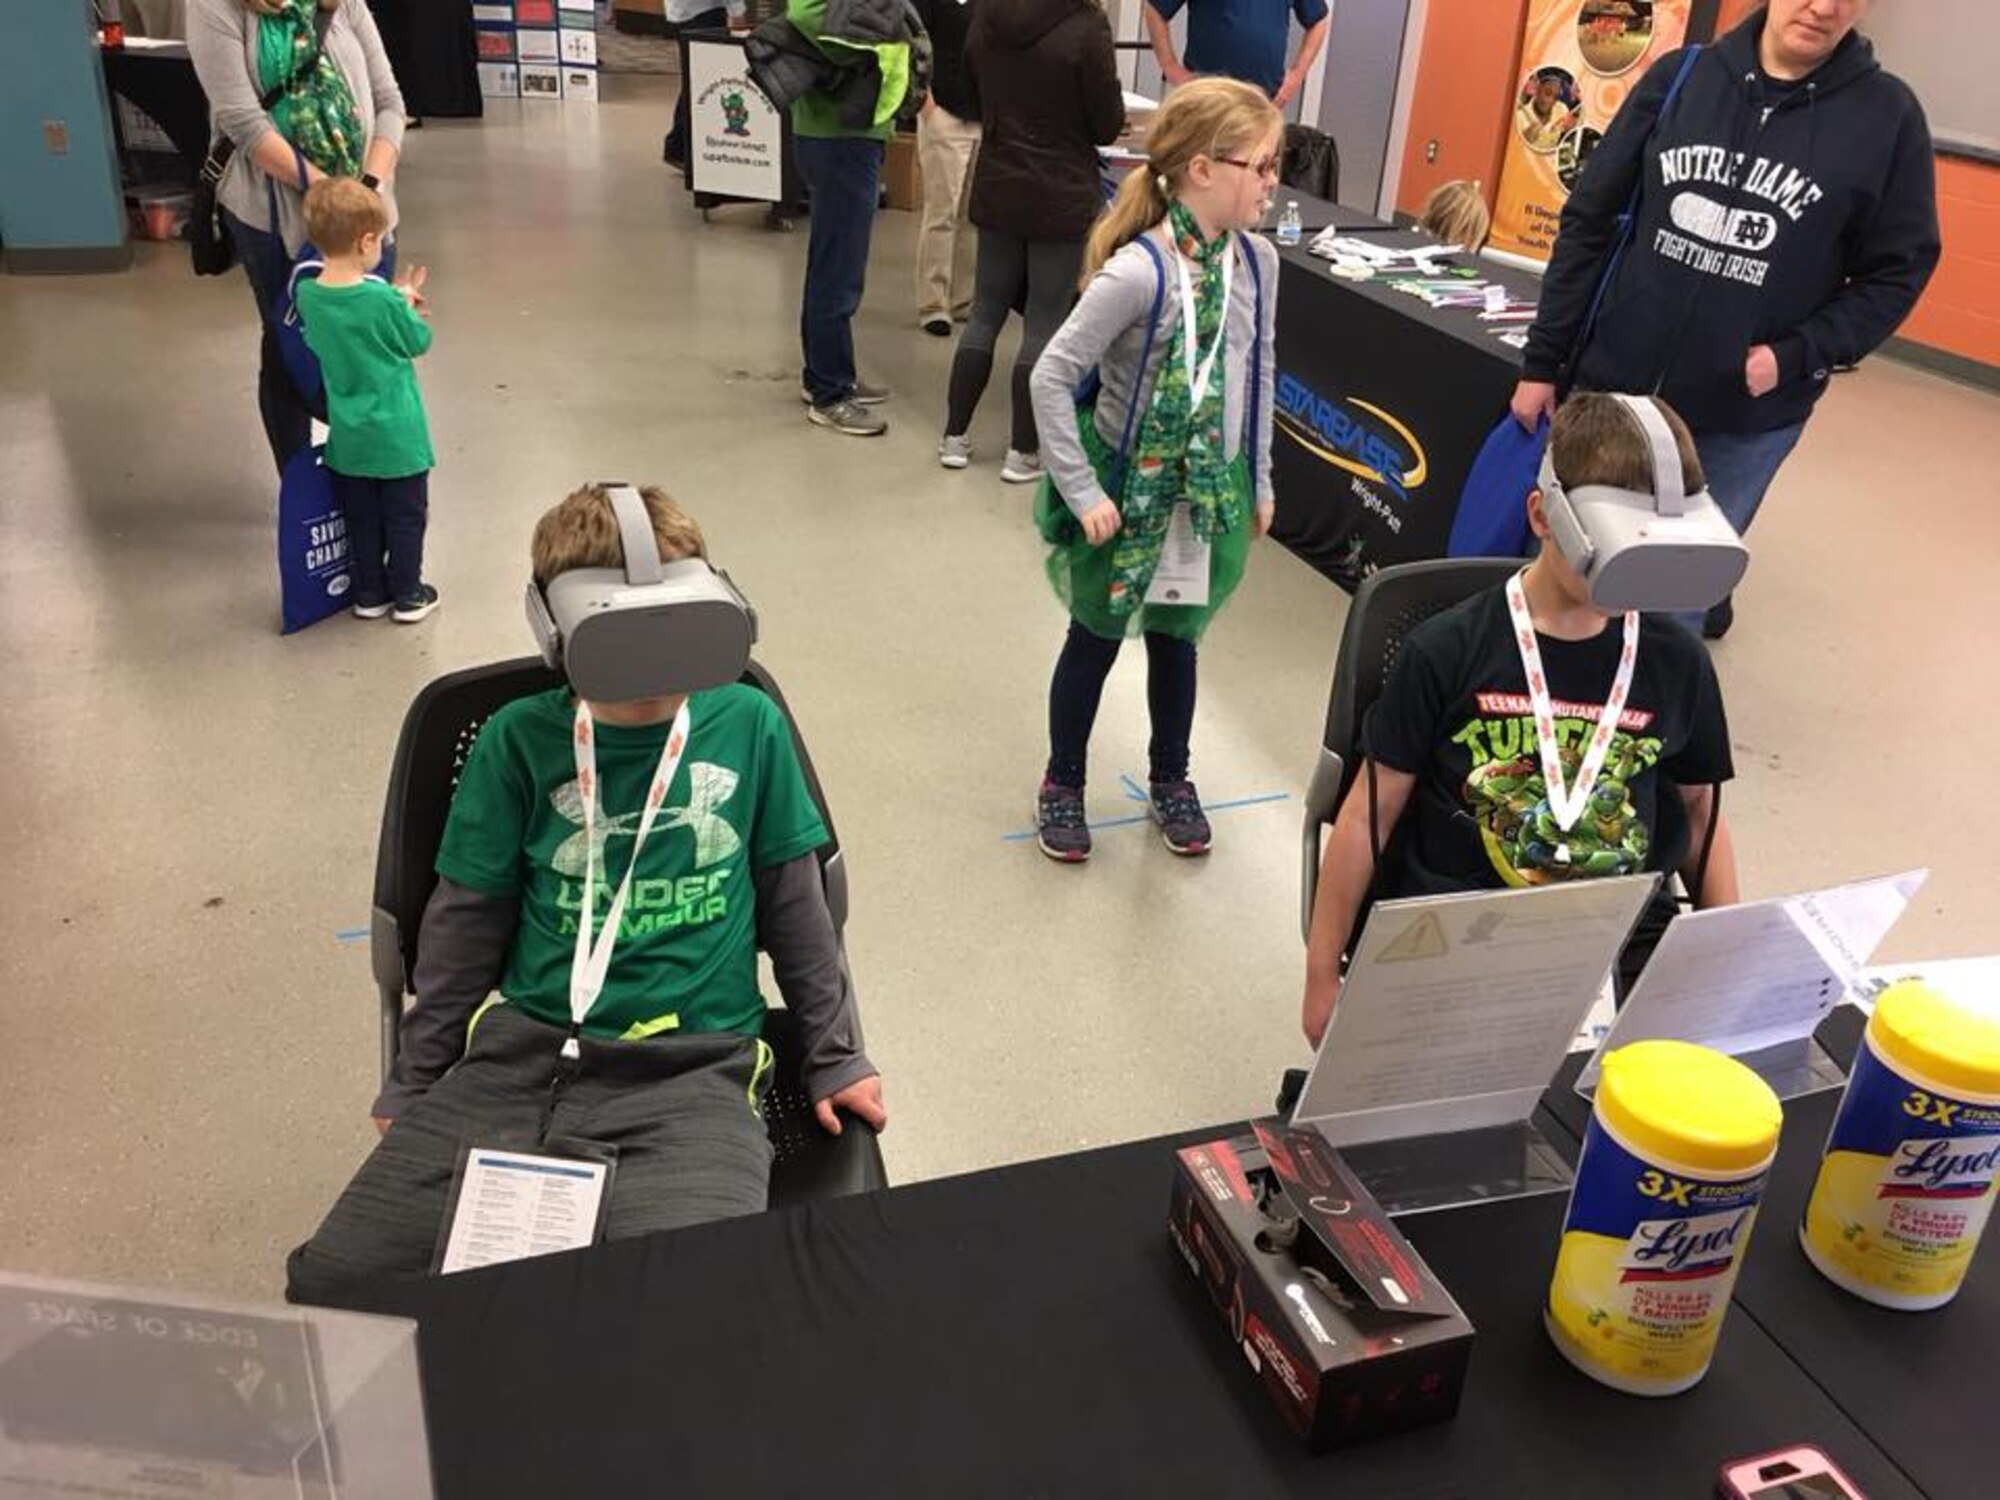 As part of Dayton’s Big Hoopla, children participated in activities related to science, technology, engineering and math at the Hoopla STEM challenge March 17 at Chaminade Julienne High School in Dayton, Ohio. (Courtesy photo)